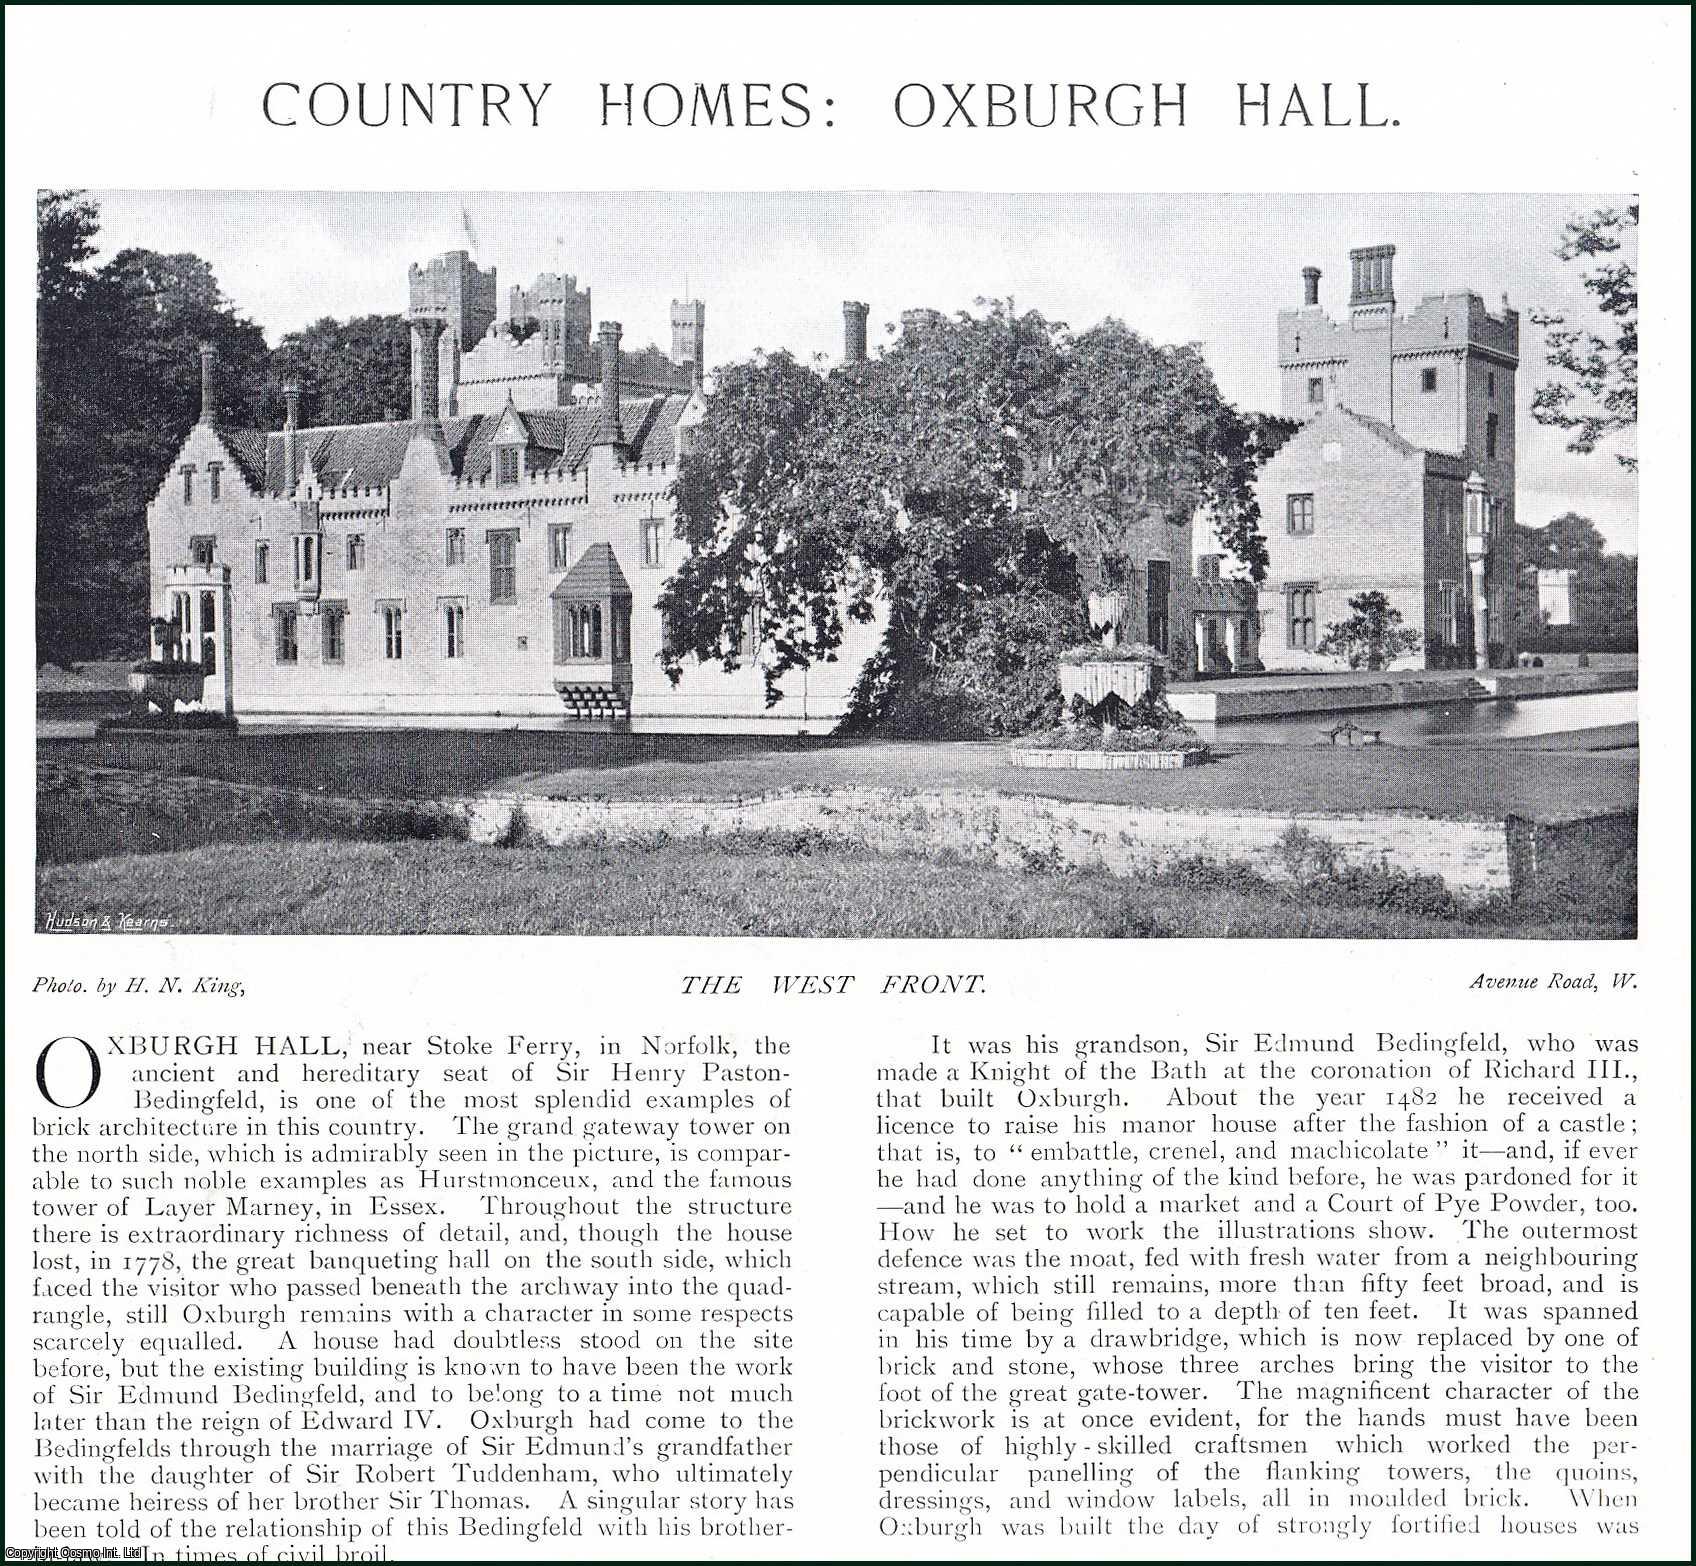 John Leyland - Oxburgh Hall, near Stoke Ferry, in Norfolk : the Ancient & Hereditary Seat of Sir Henry Paston-Bedingfield. Several pictures and accompanying text, removed from an original issue of Country Life Magazine, 1897.